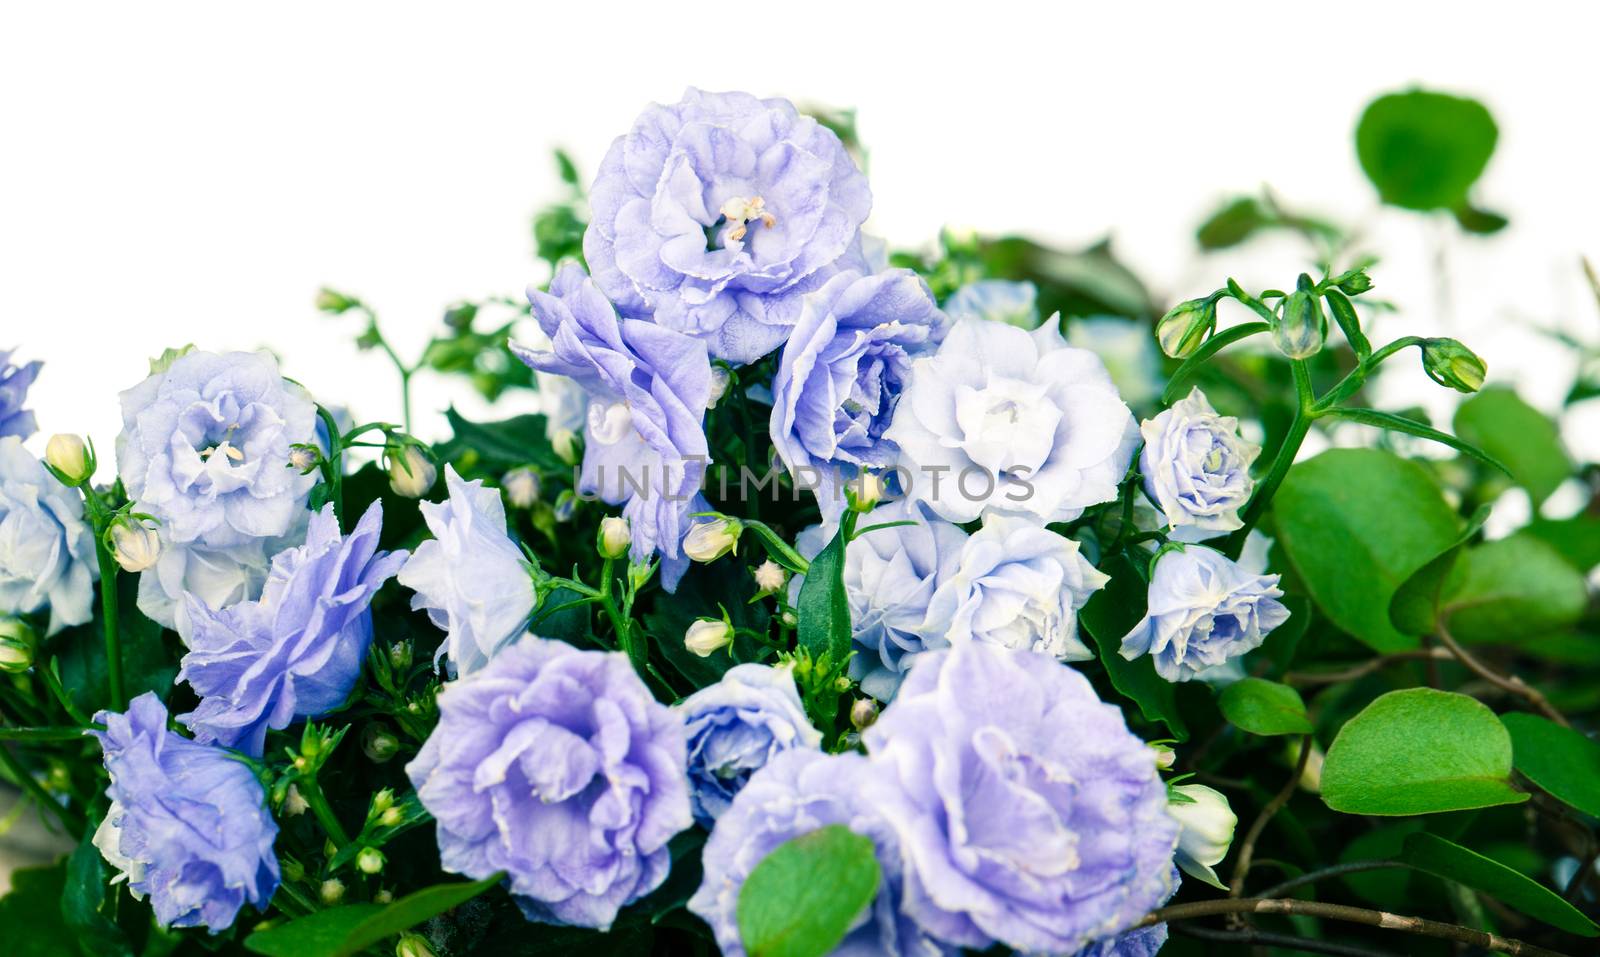 Campanula terry with blue flowers isolated on white background